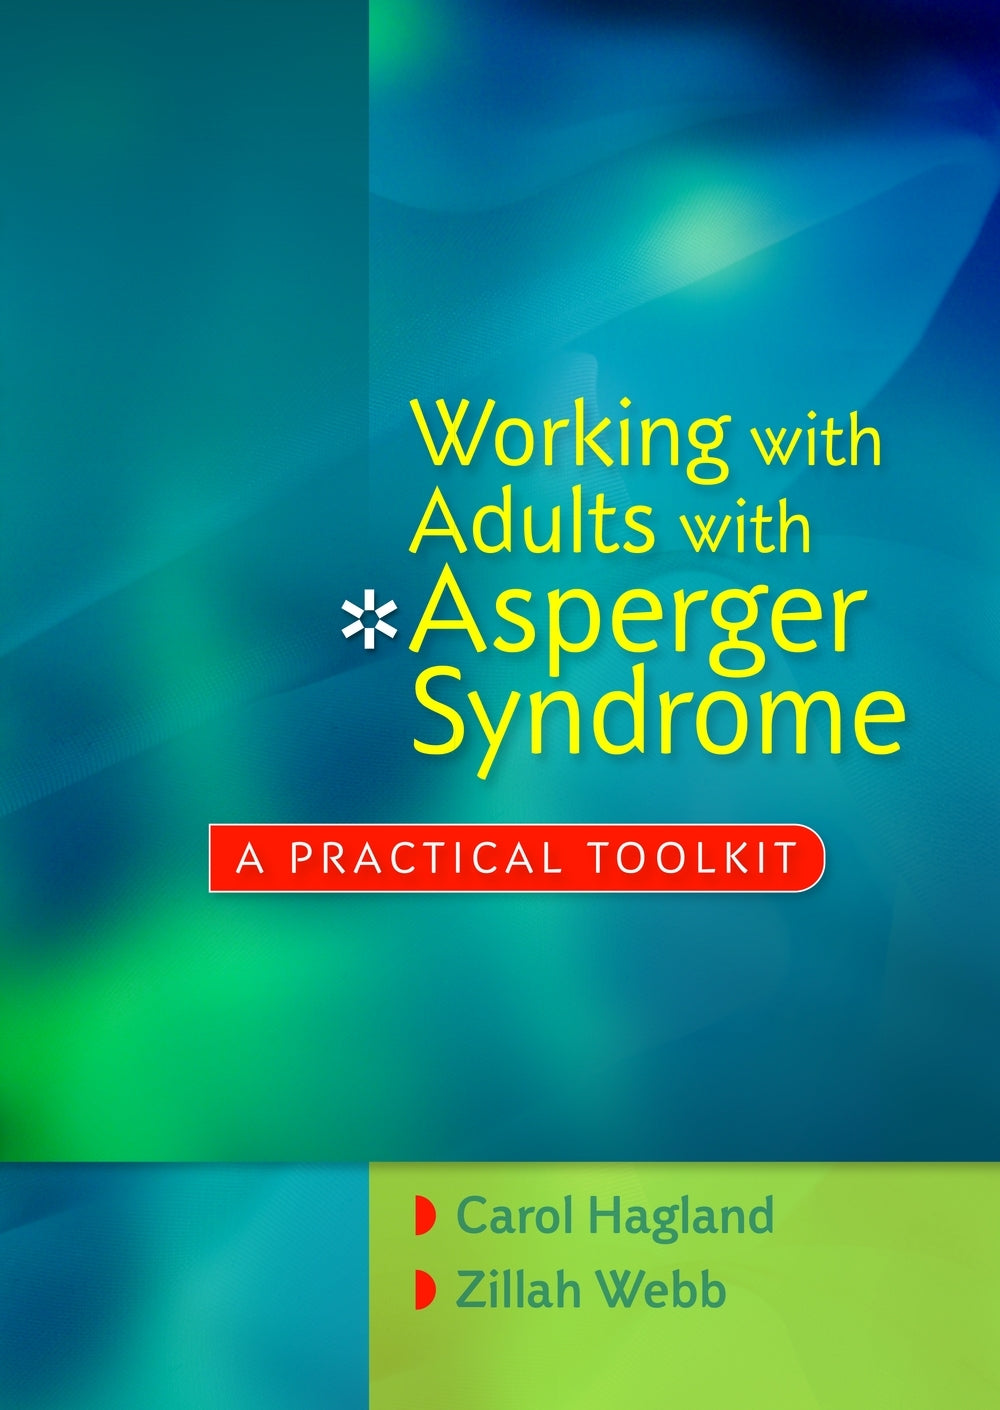 Working with Adults with Asperger Syndrome by Carol Hagland, Zillah Webb